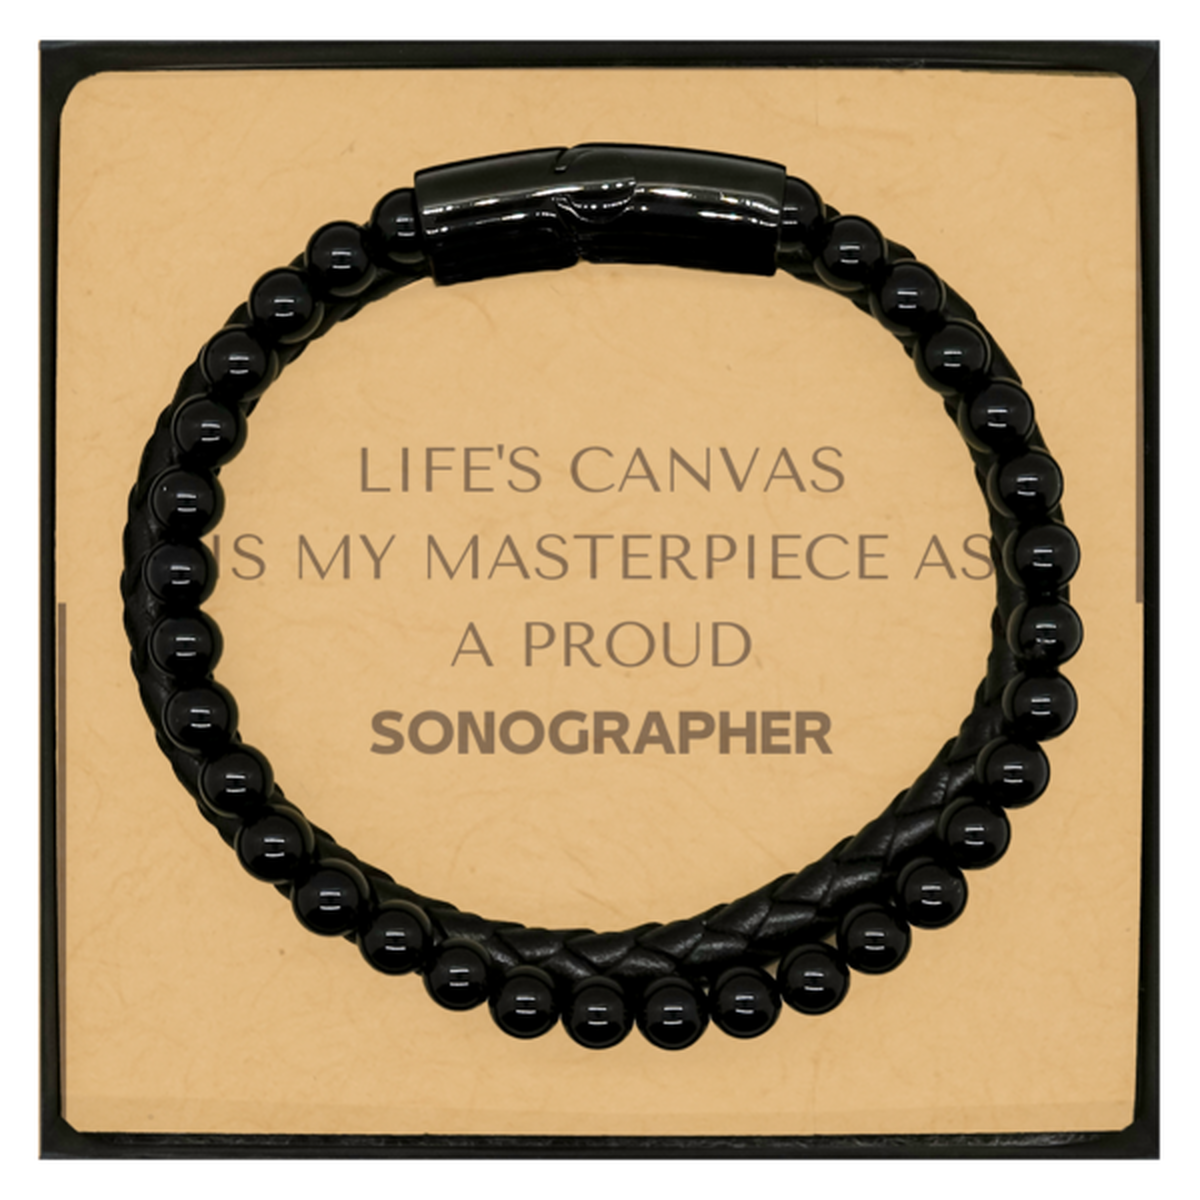 Proud Sonographer Gifts, Life's canvas is my masterpiece, Epic Birthday Christmas Unique Stone Leather Bracelets For Sonographer, Coworkers, Men, Women, Friends